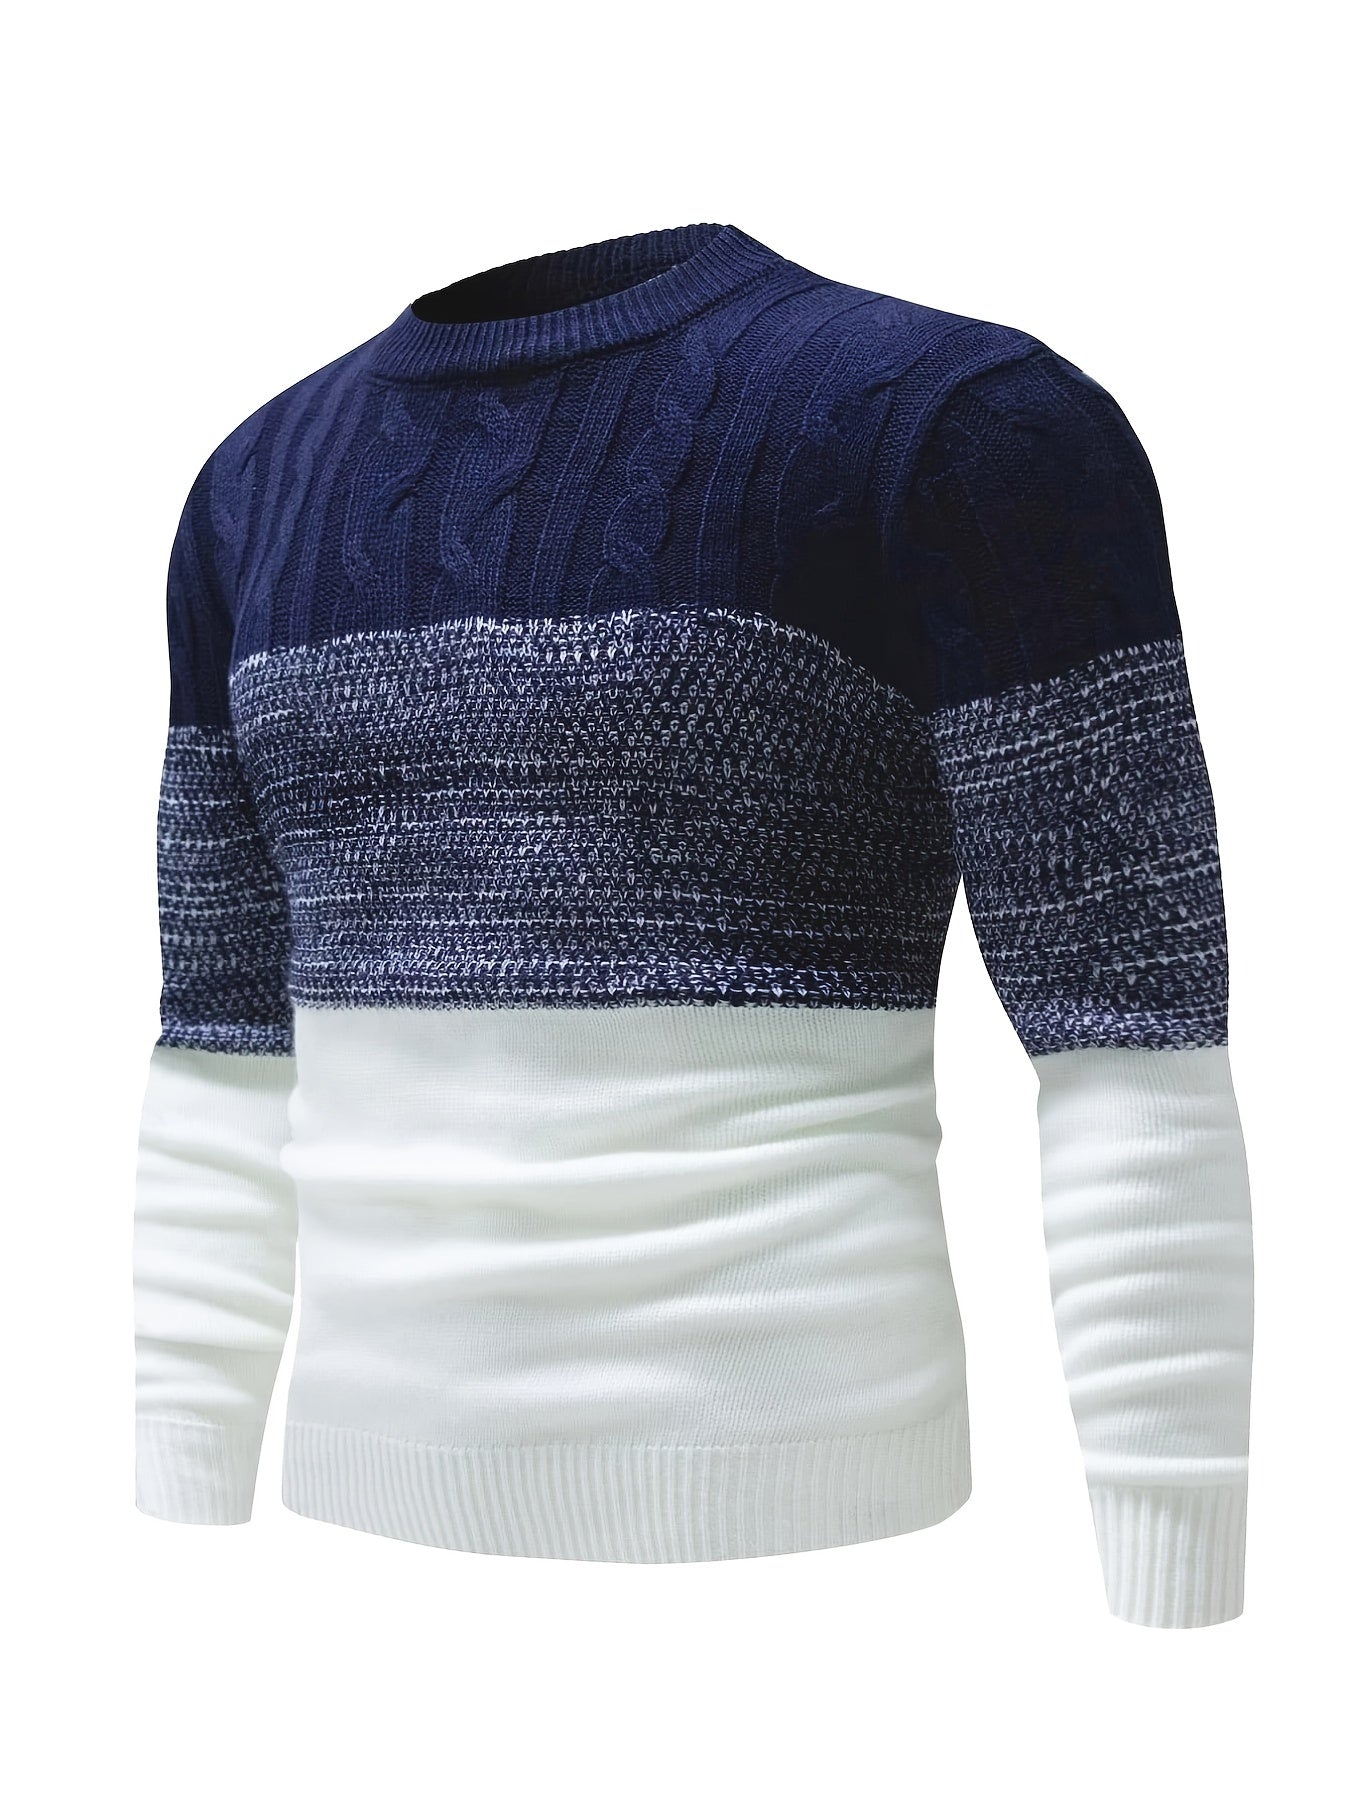 New Men's Round Neck Soft Casual Colorblock Twist Pullover Knitted Sweater